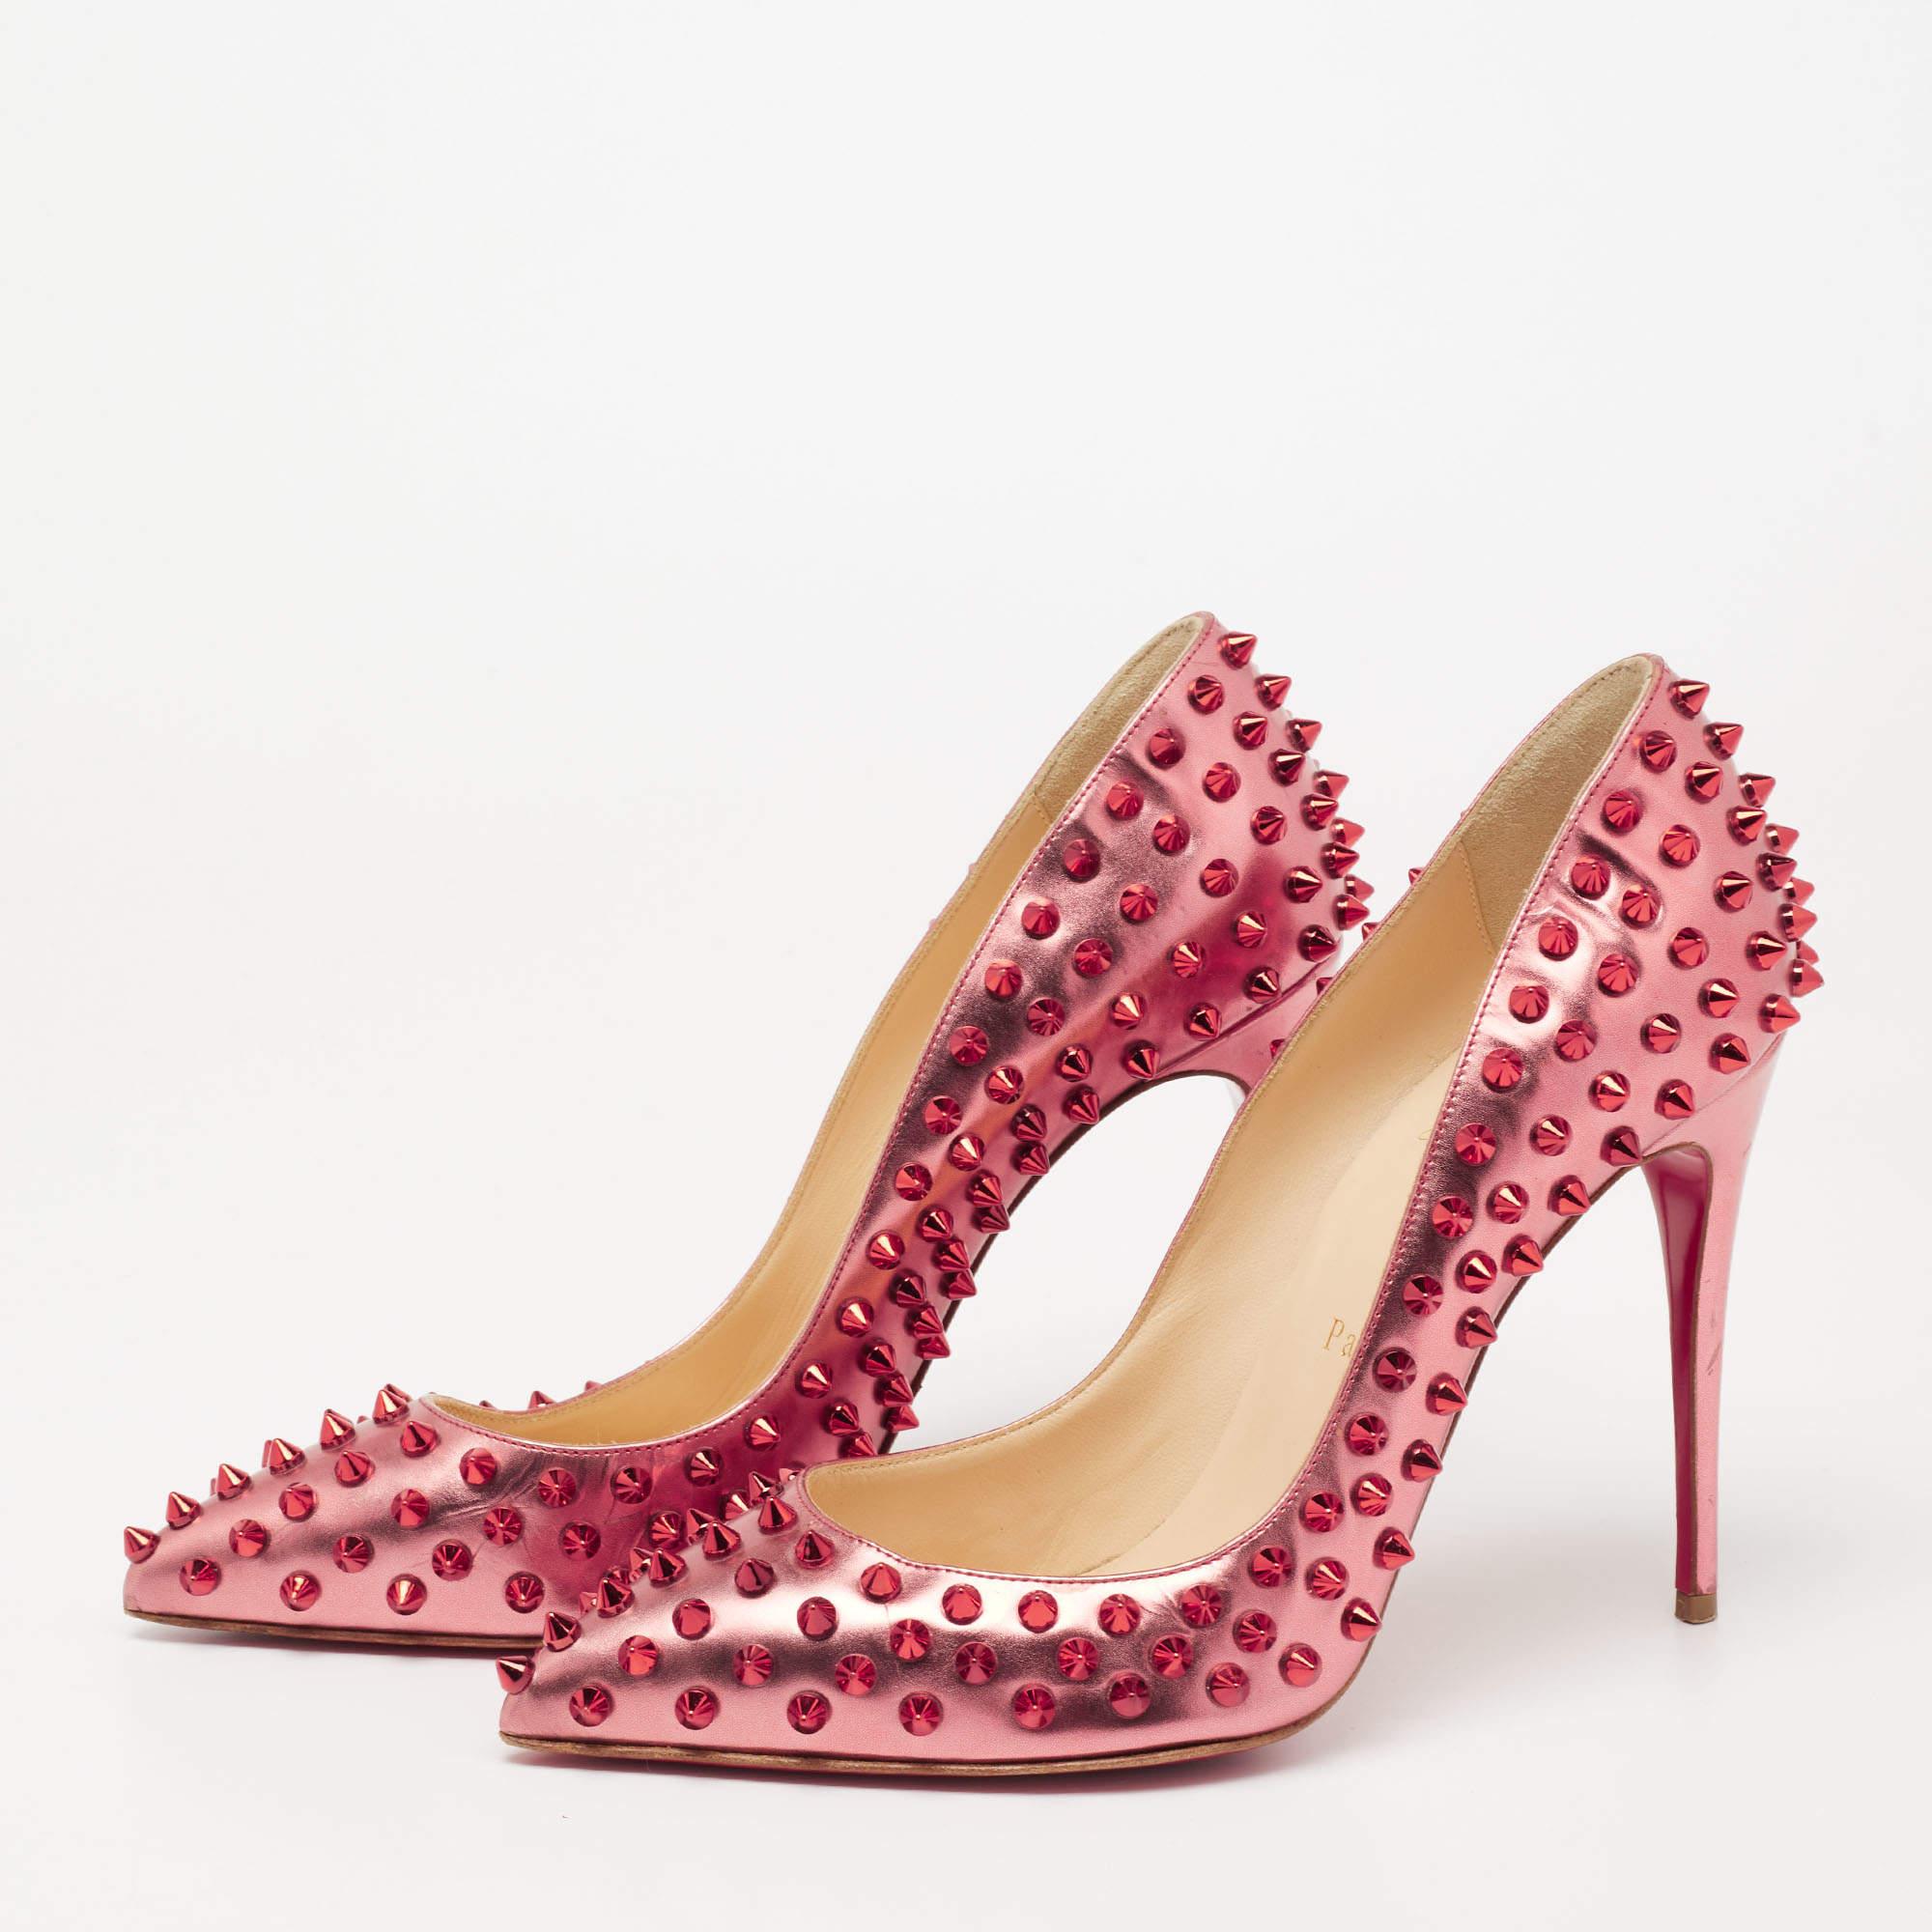 Christian Louboutin Two-Tone Metallic Leather Pigalle Spikes Pumps Size 38.5 In Good Condition For Sale In Dubai, Al Qouz 2